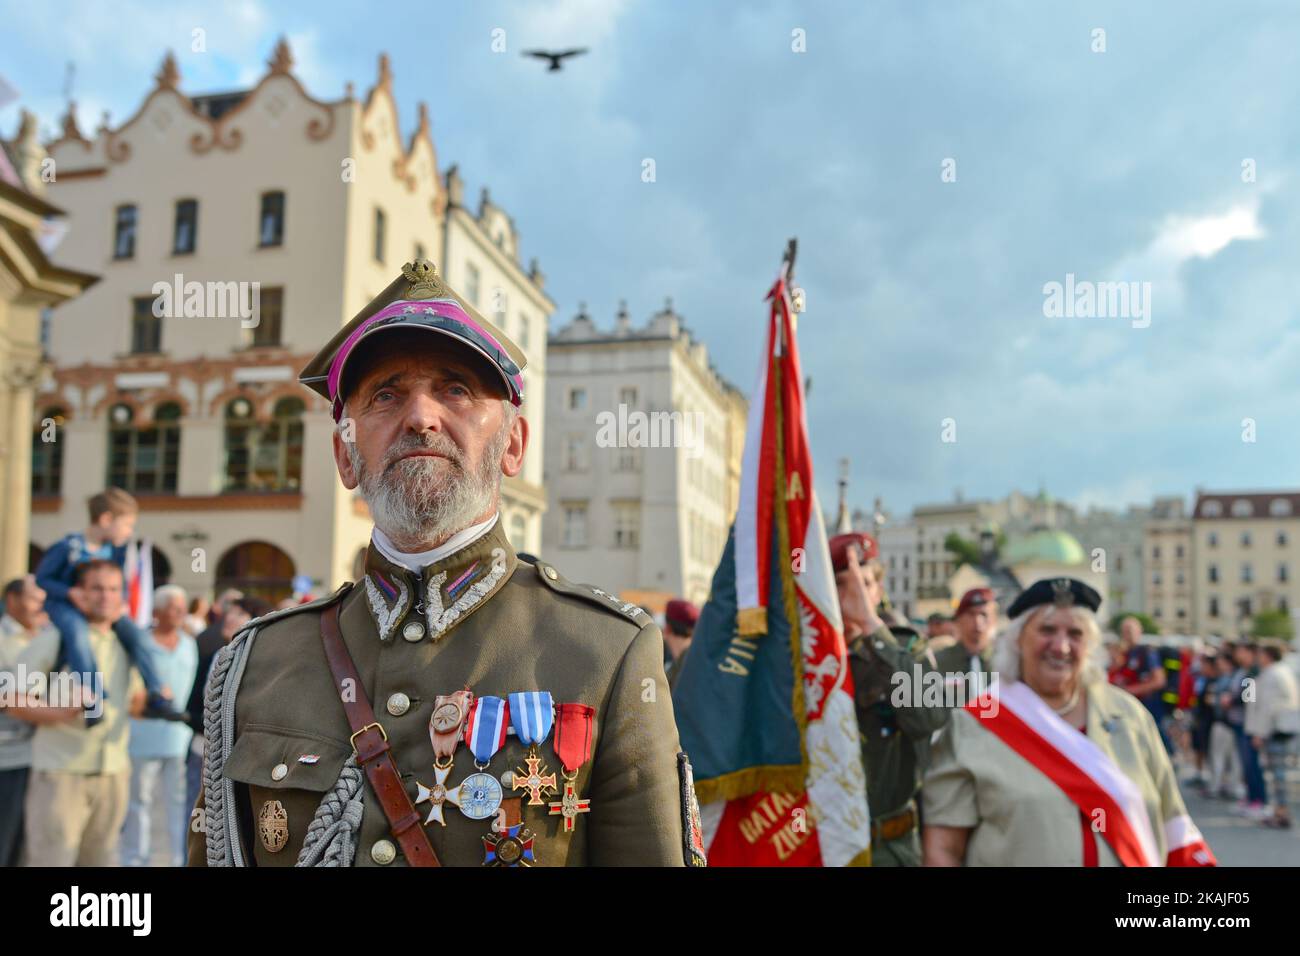 The 72nd anniversary of Warsaw Upraising 1944, in Krakow city center on 1 August, 2016, in Krakow, Poland. Photo by Artur Widak *** Please Use Credit from Credit Field *** Stock Photo